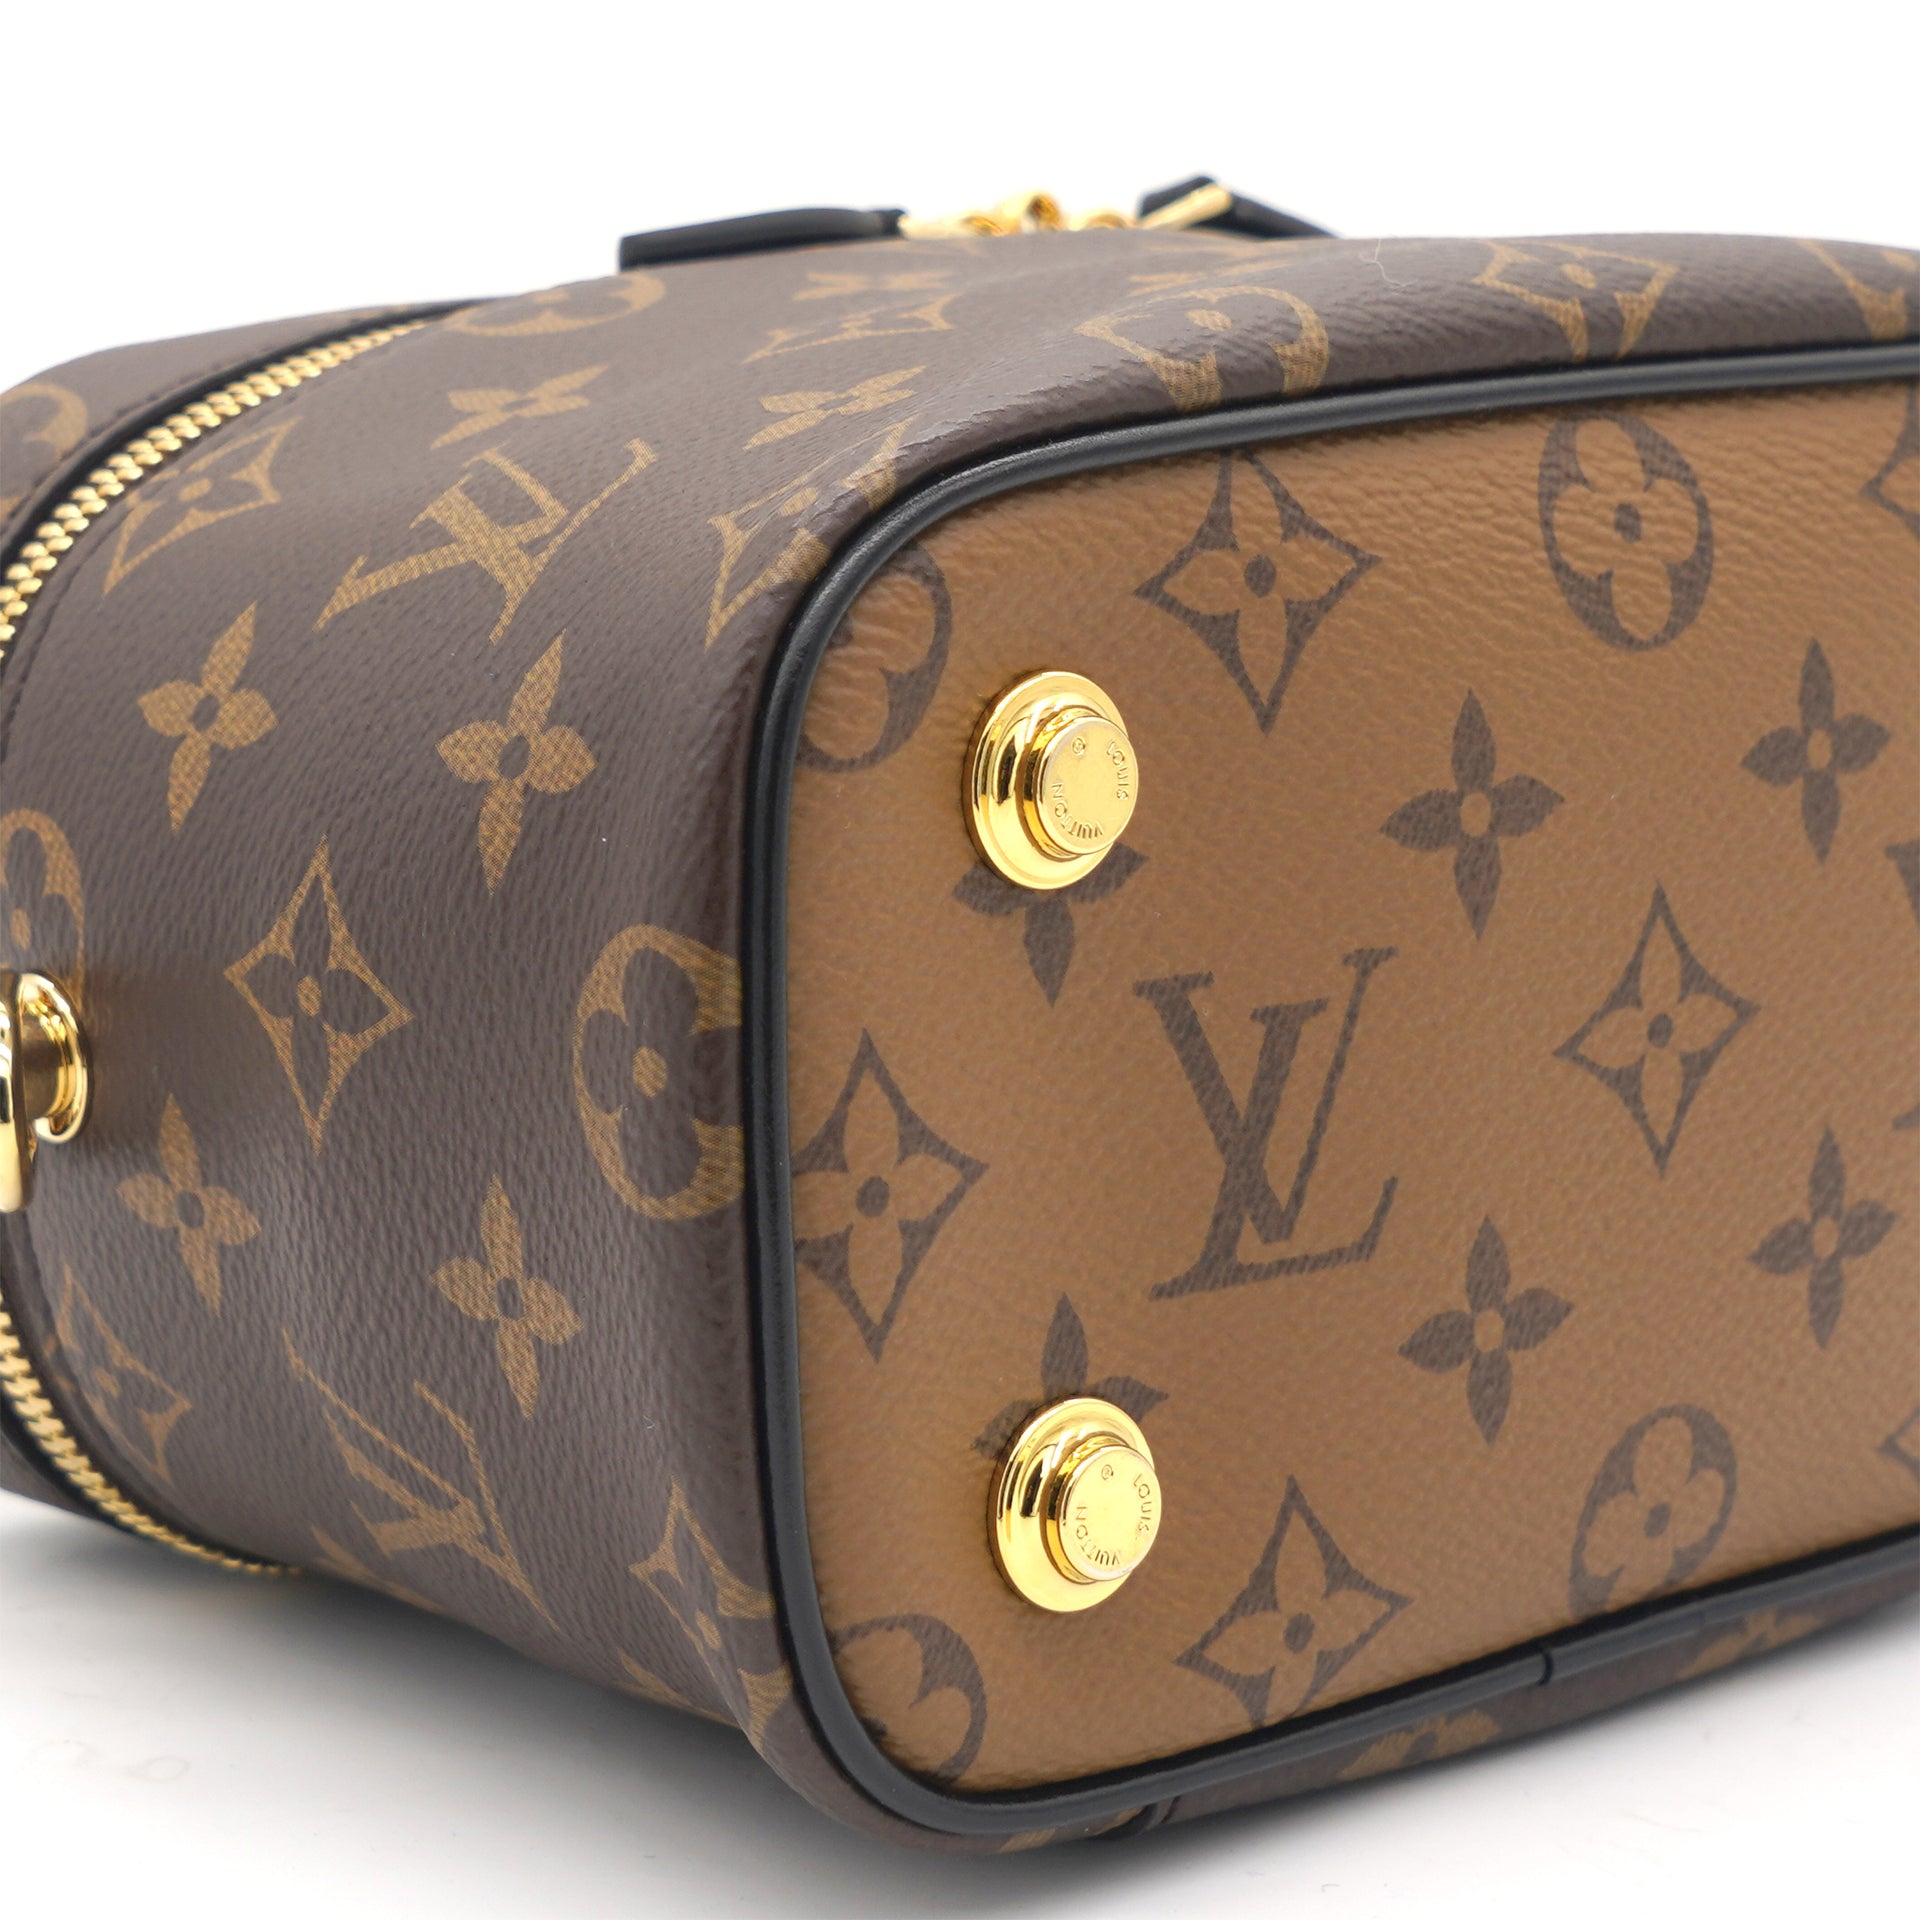 LOUIS VUITTON LV Heritage Neverfull PM Monogram Canvas Tote Bag Brown